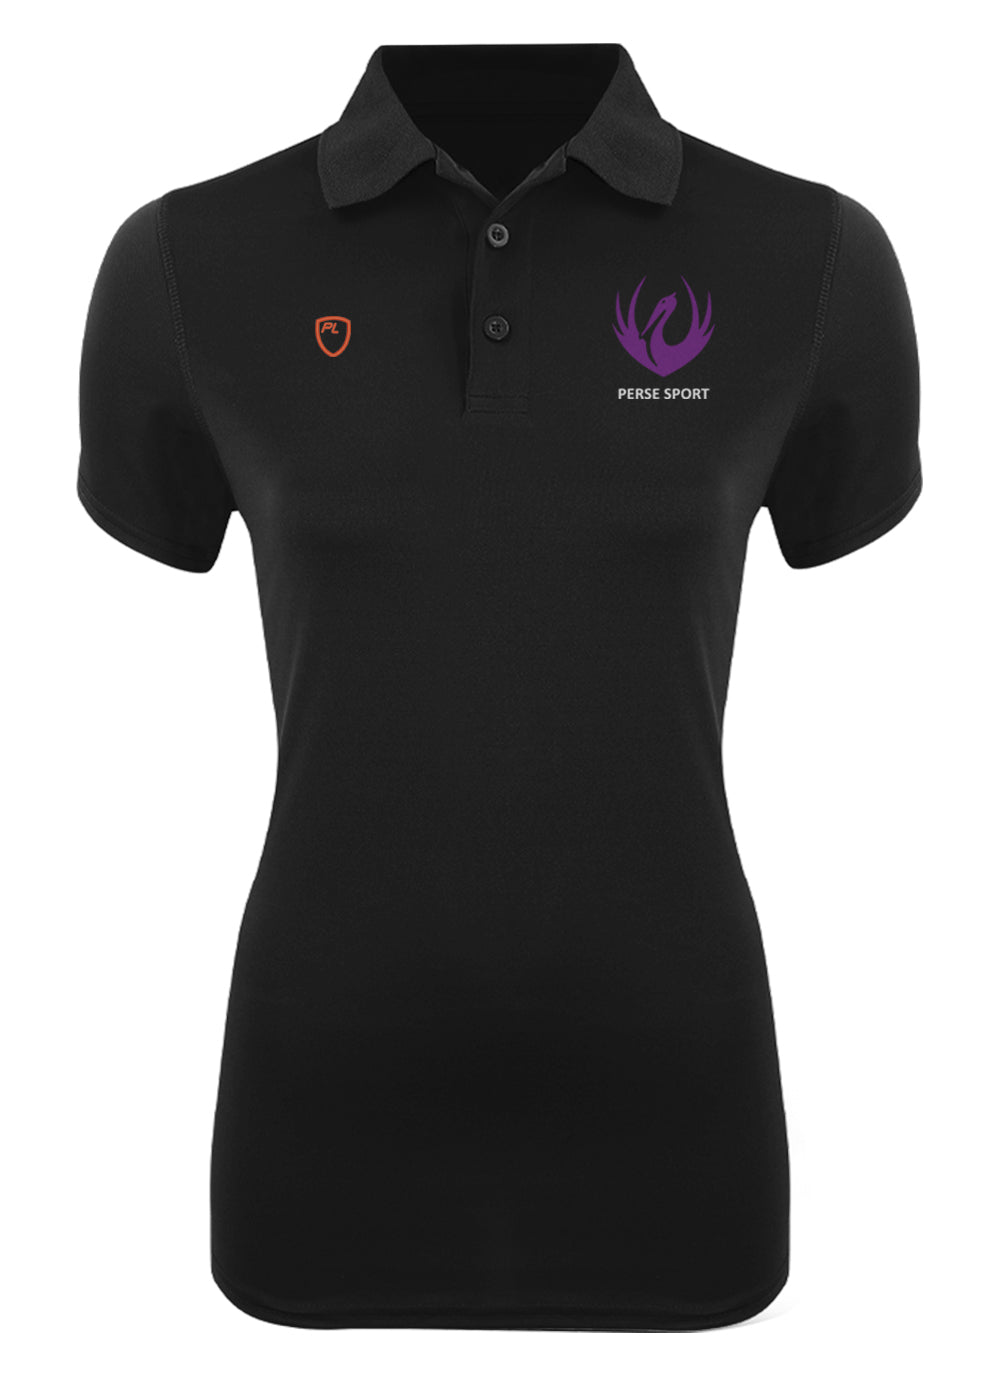 Perse Staff Performance Polo